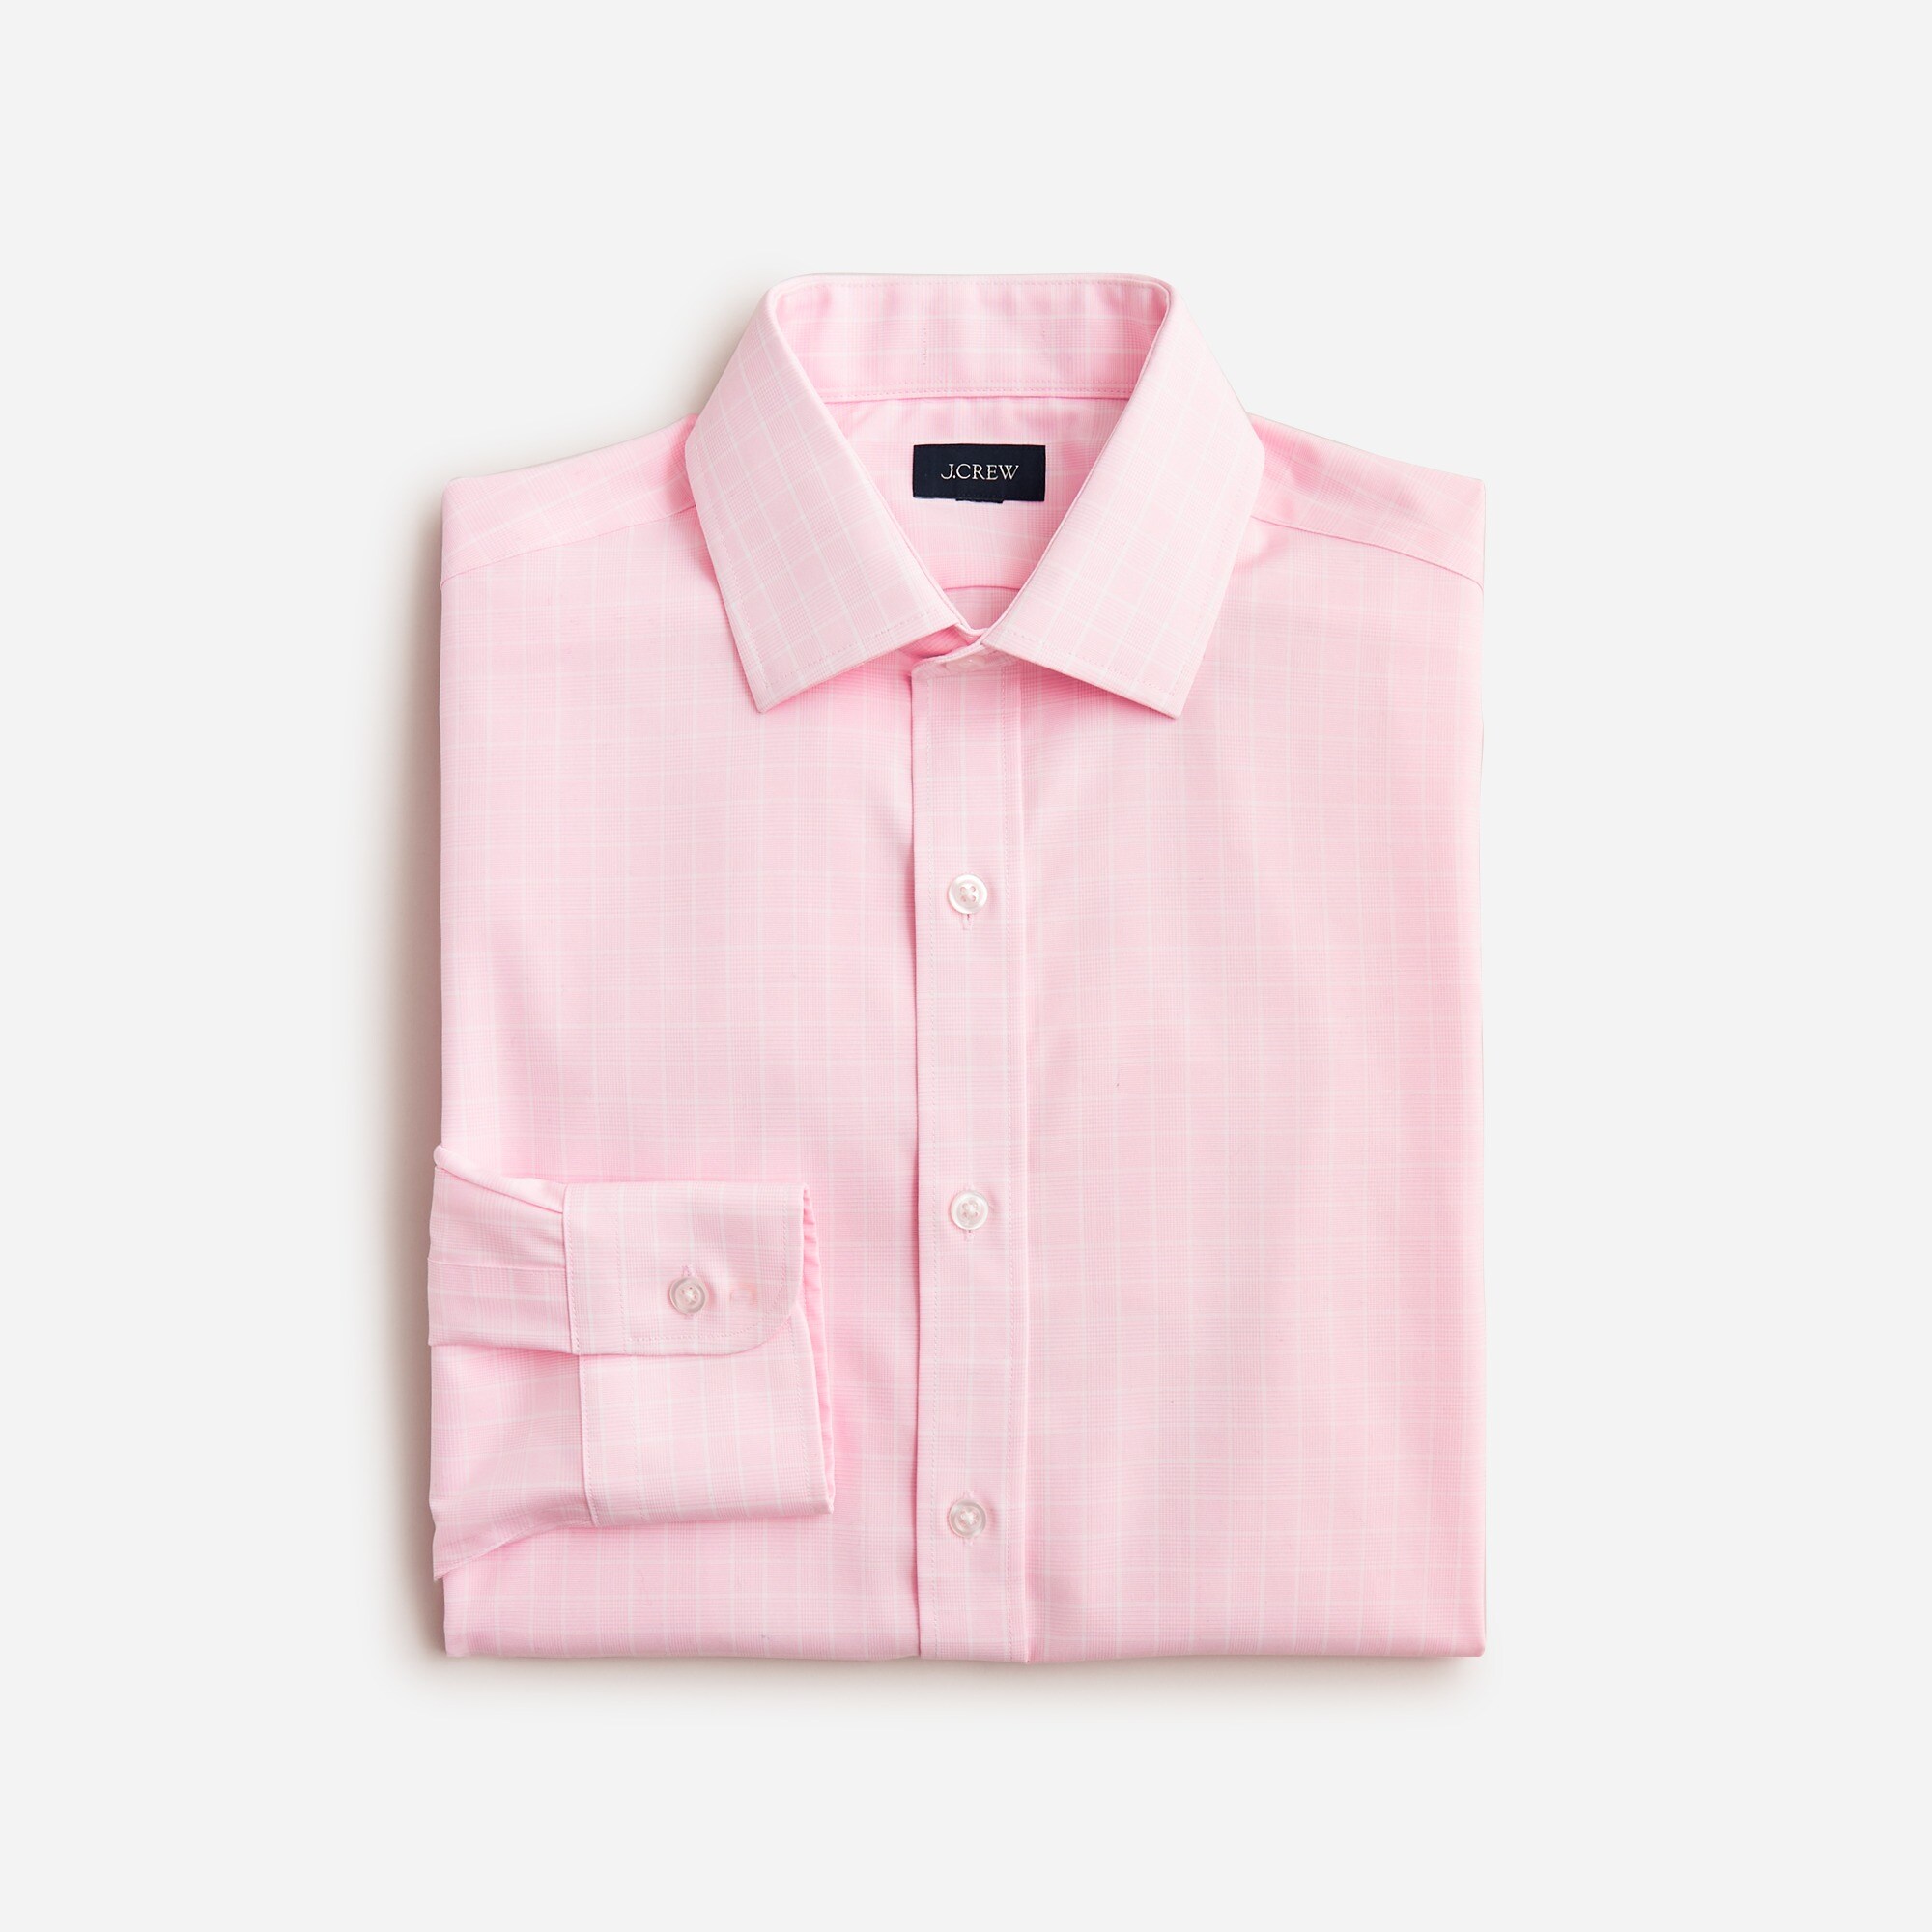 mens Slim-fit Bowery wrinkle-free stretch cotton shirt with spread collar